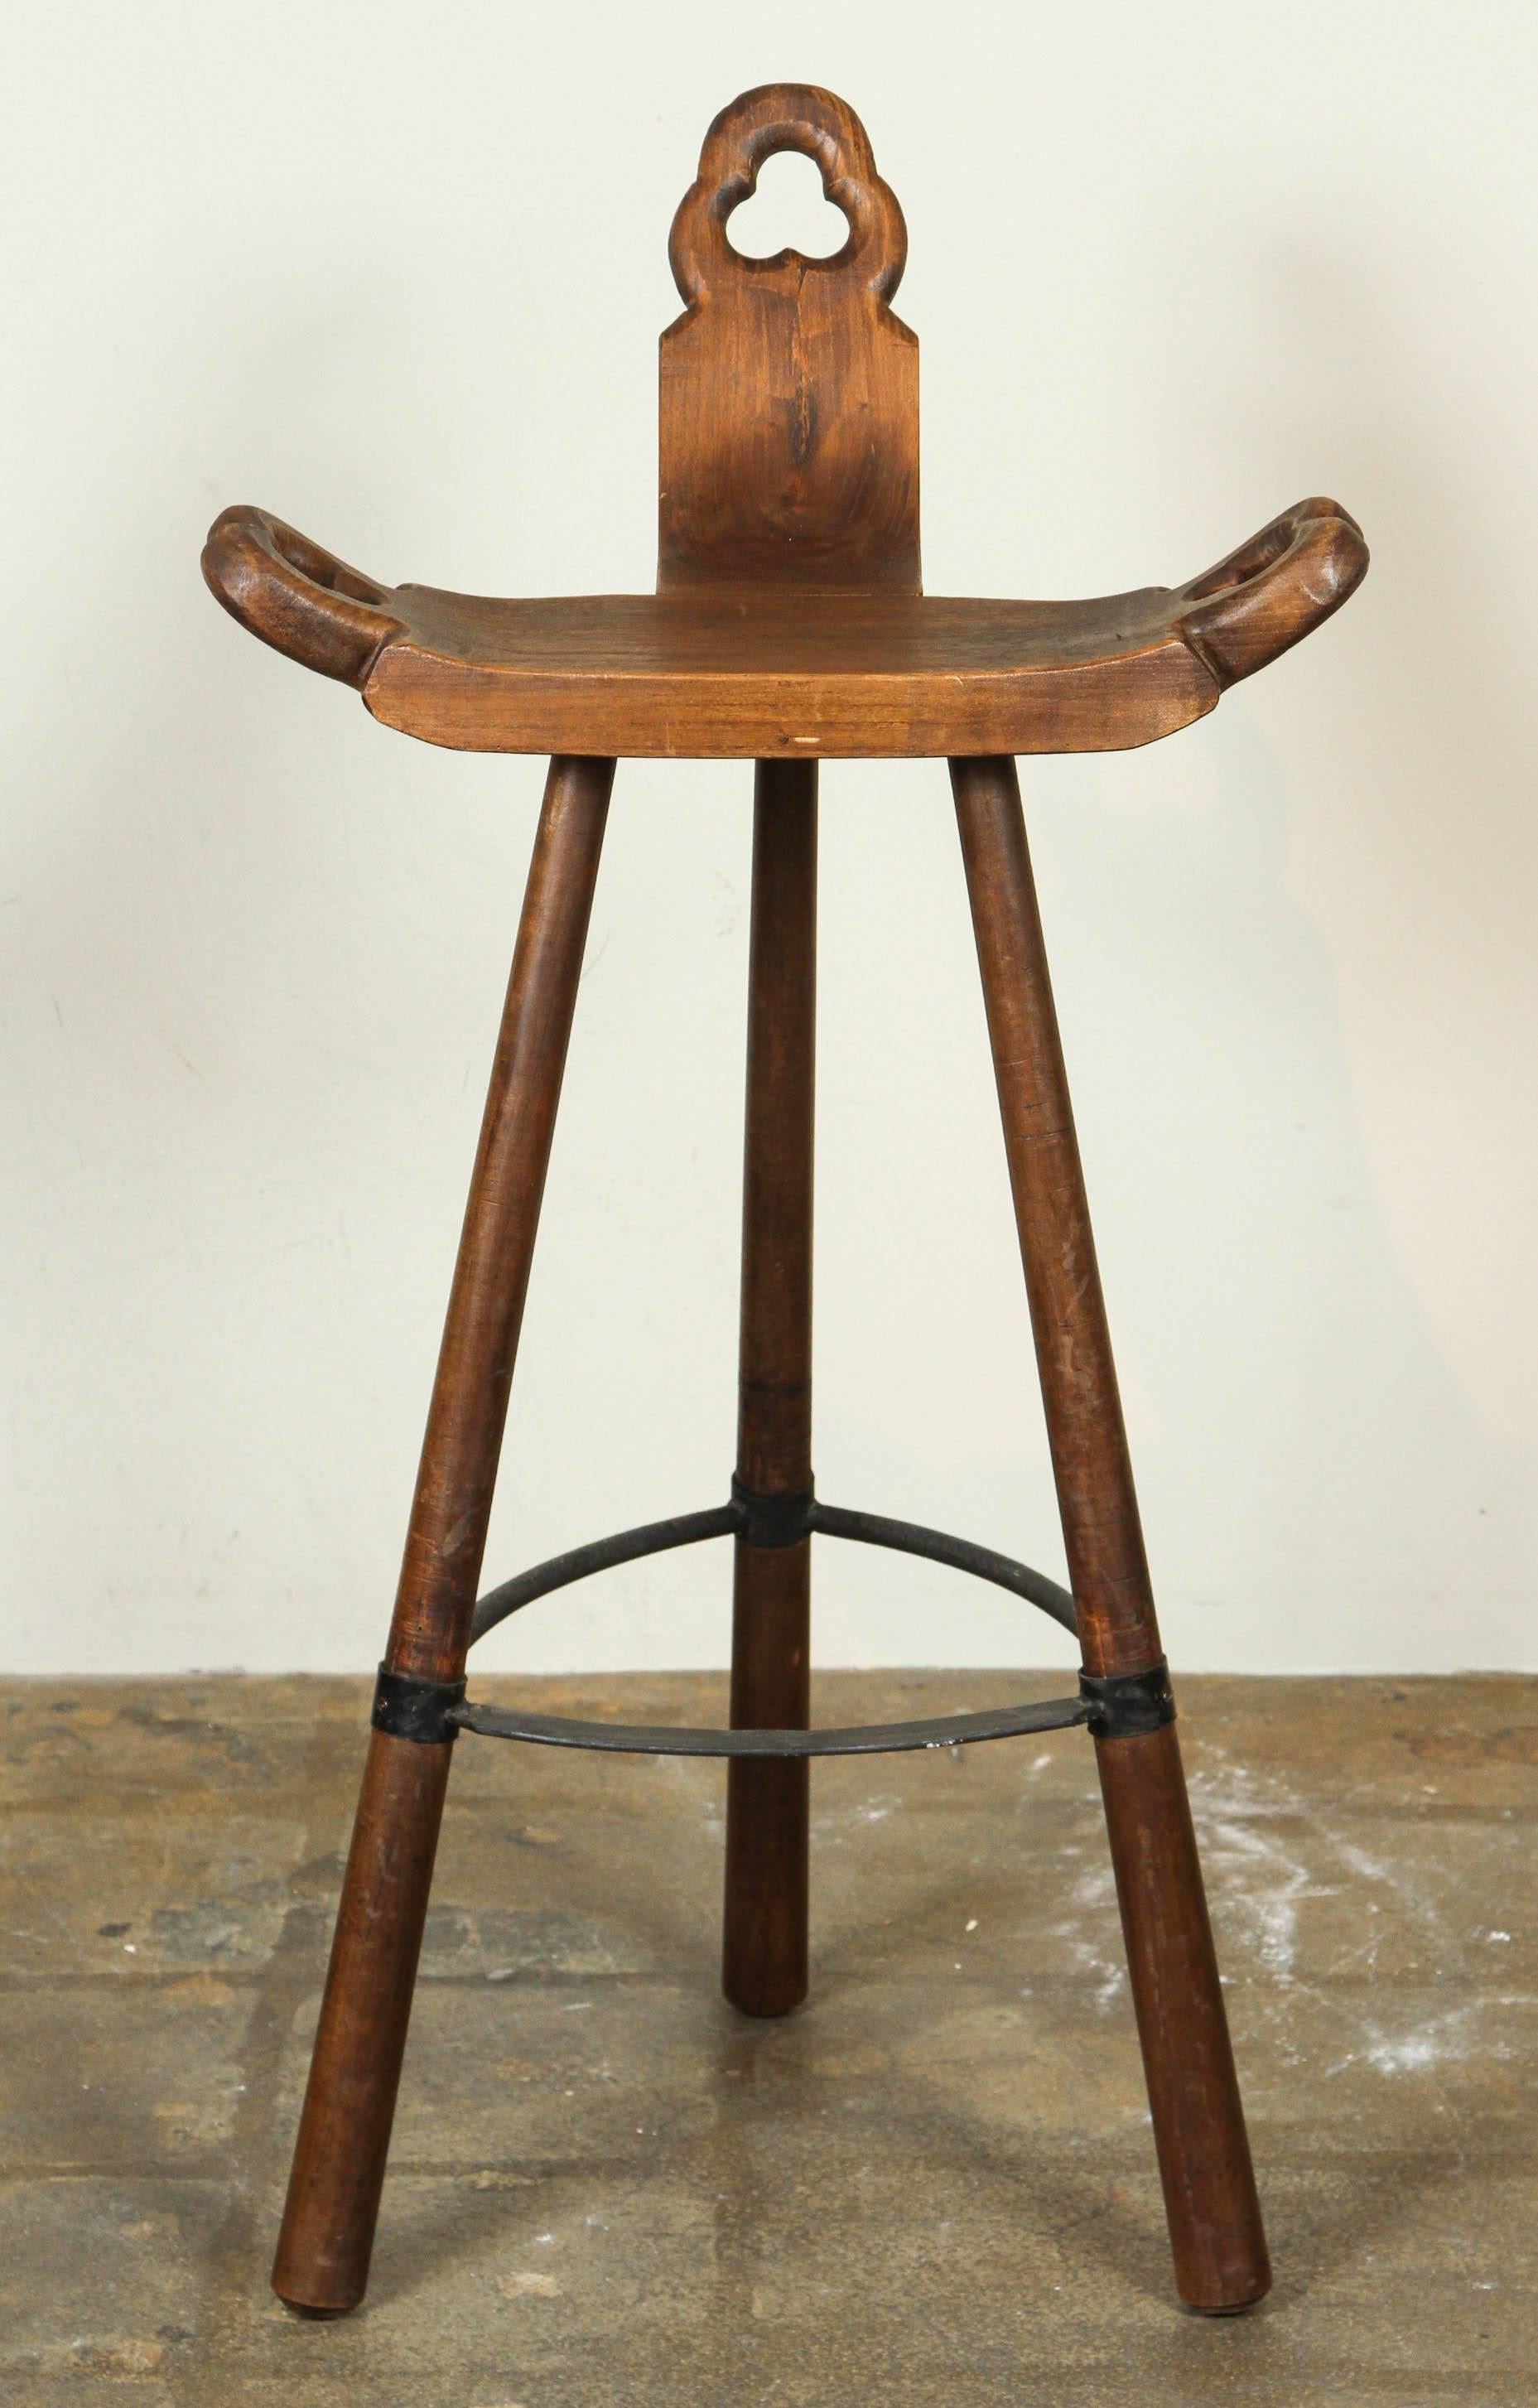 Carved wooden and iron stool (possibly African). We think this is early 20th century or older, but have listed them as Mid-Century to error on the safe side.
   
   